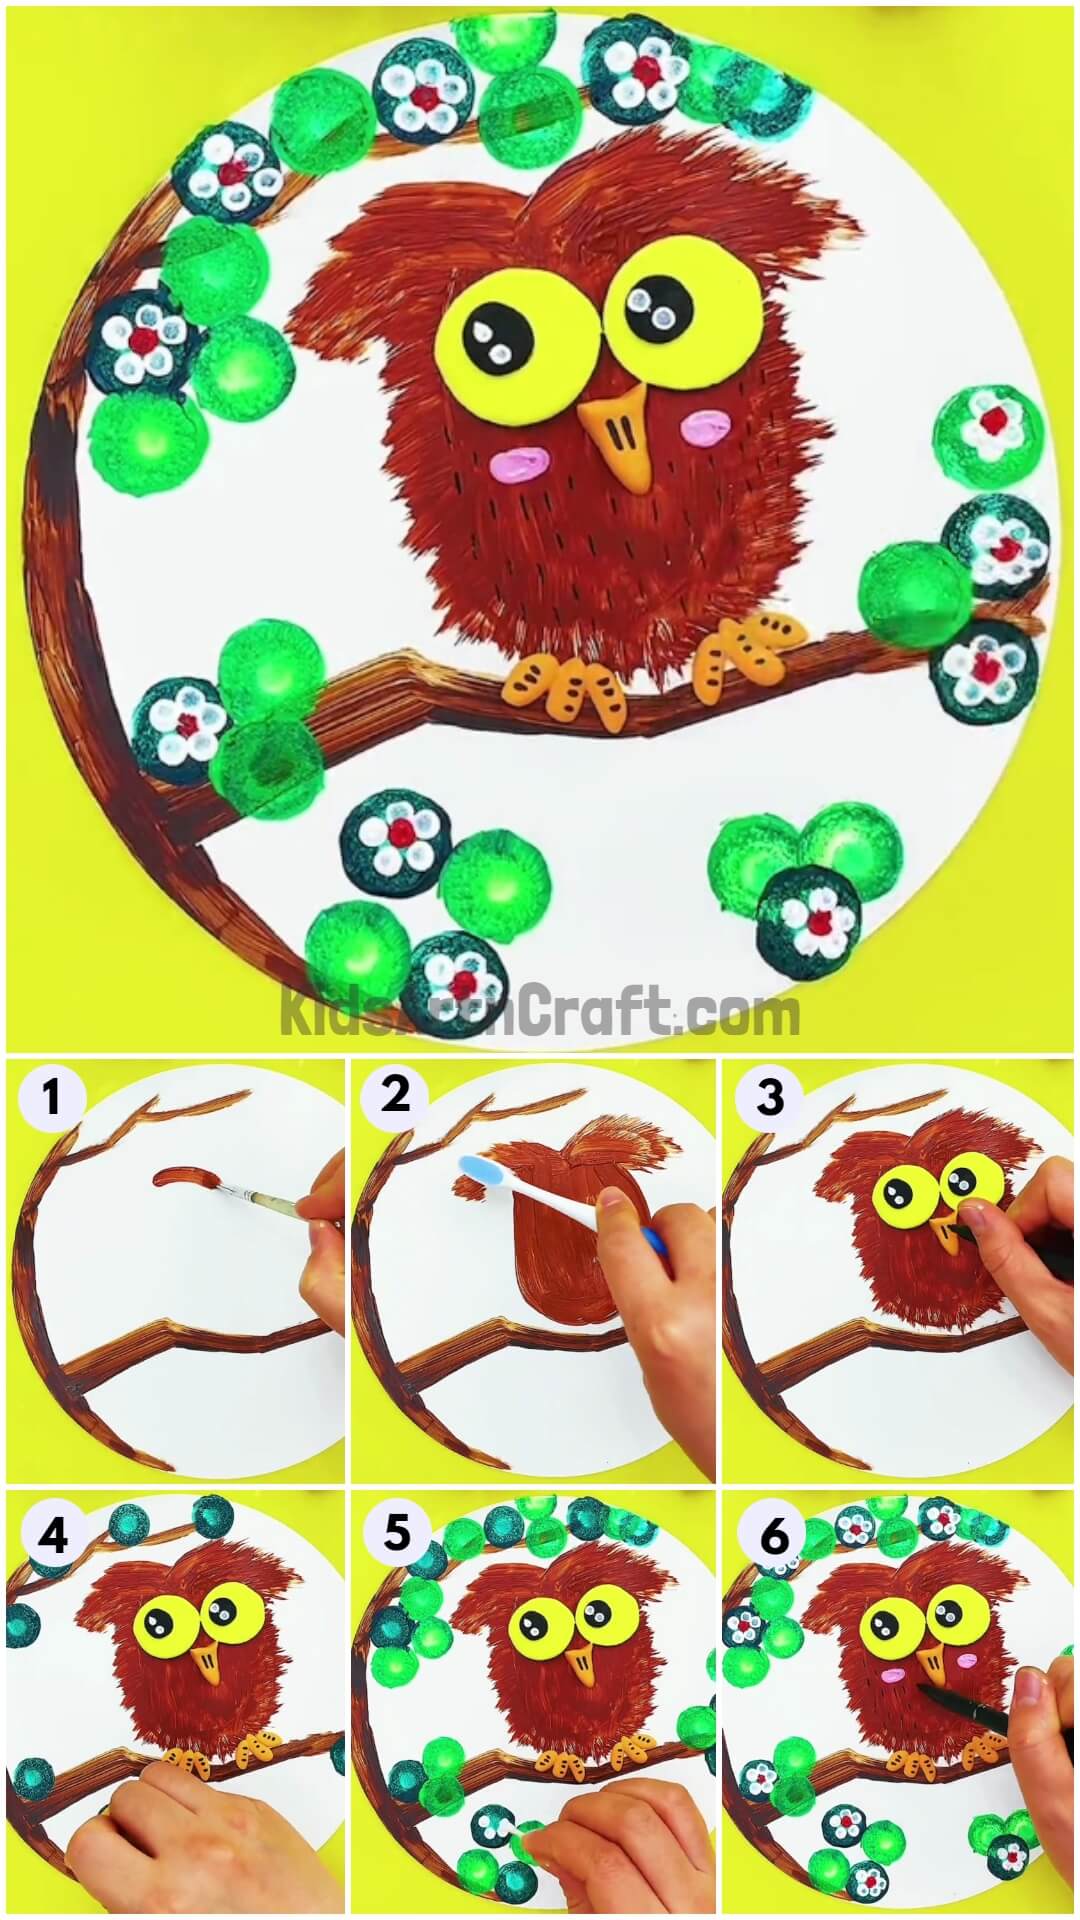 Creative Owl Painting Idea For Kids Step-by-step Tutorial